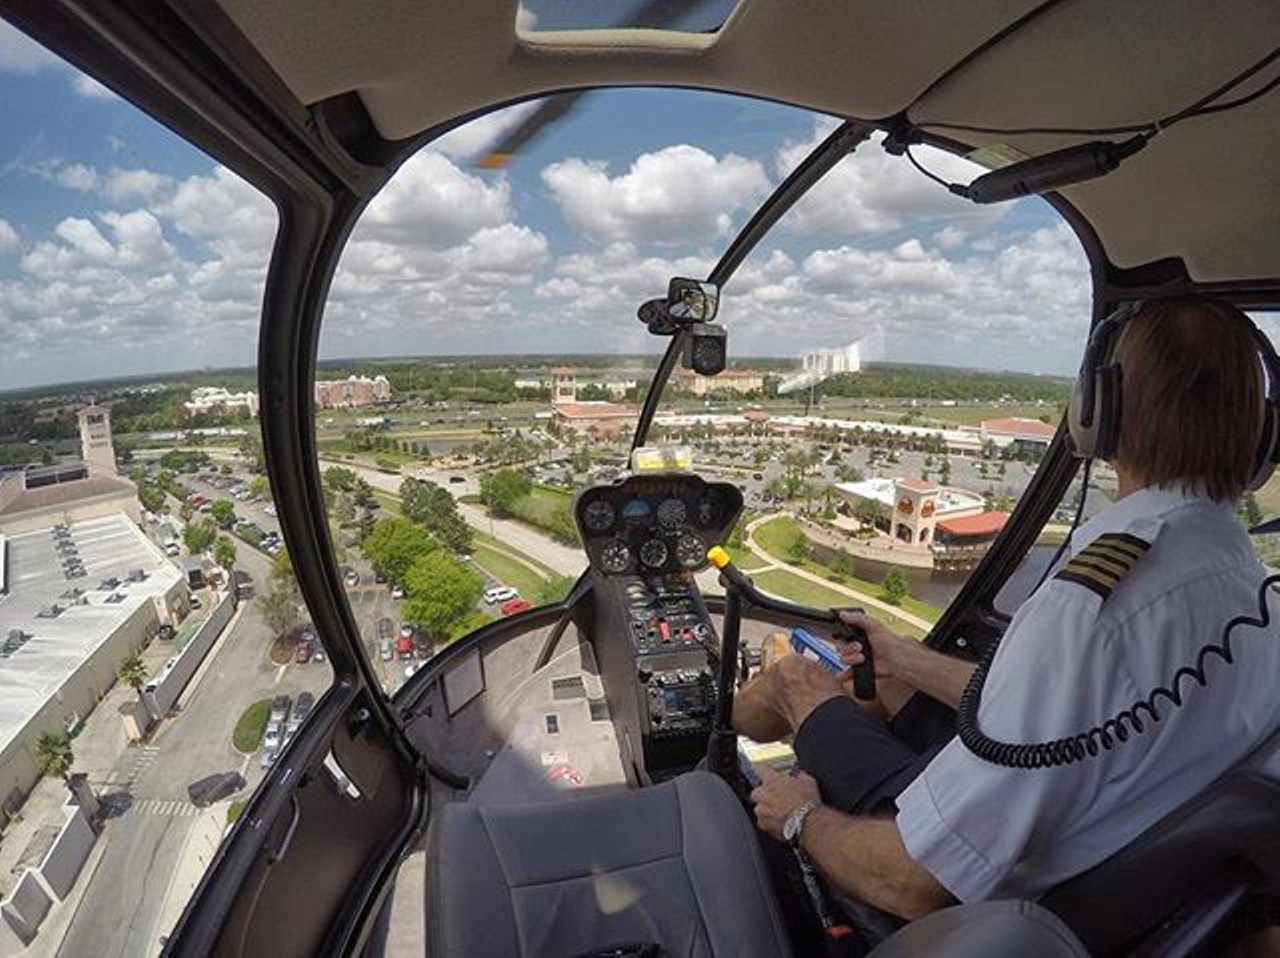  Air Force Fun Helicopter Tour
12211 Regency Village Drive #13 Orlando, 407-842-1446, $20-$137.13 
See Orlando and all of its many attractions from a bird&#146;s eye view. Their cheapest tour takes you over SeaWorld, Aquatica, and Discovery Cove. There is a minimum of 2 passengers per flight, and a maximum of three. They&#146;re open daily from 9:30 a.m. until sunset, and they operate on a first-come first-serve basis. 
Photo via family_gym_jeep_repeat/Instagram